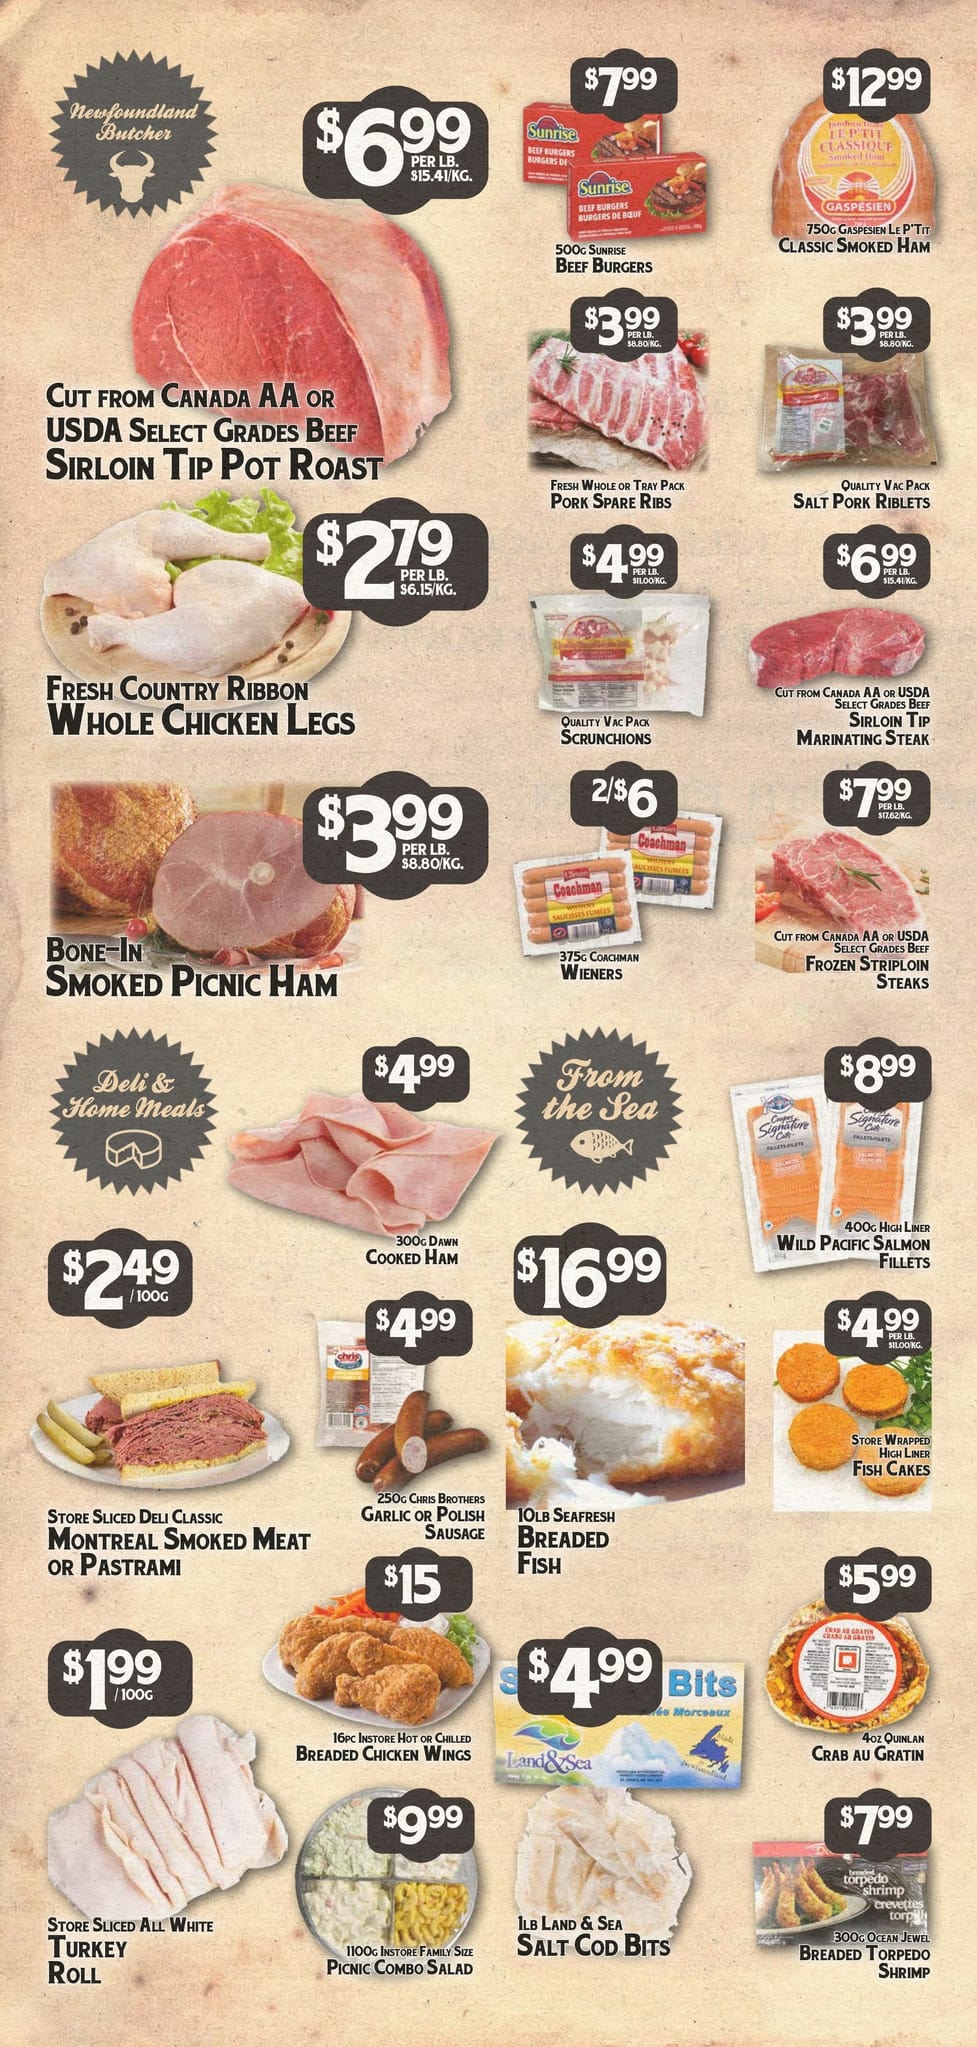 Powell's Supermarket - Weekly Flyer Specials - Page 2